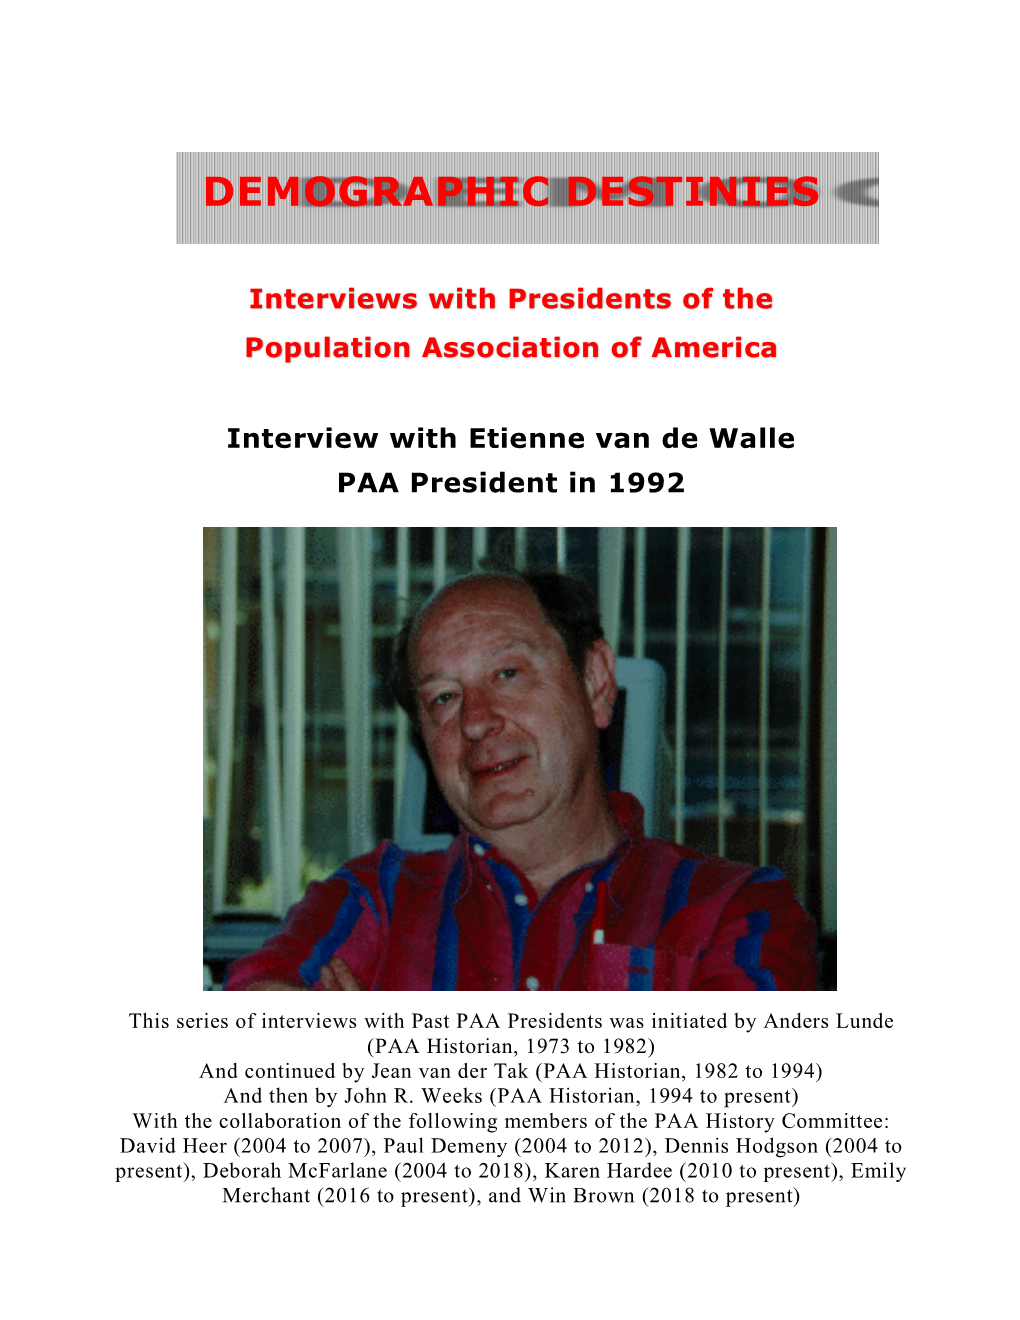 DEMOGRAPHIC DESTINIES Interviews with Presidents of The